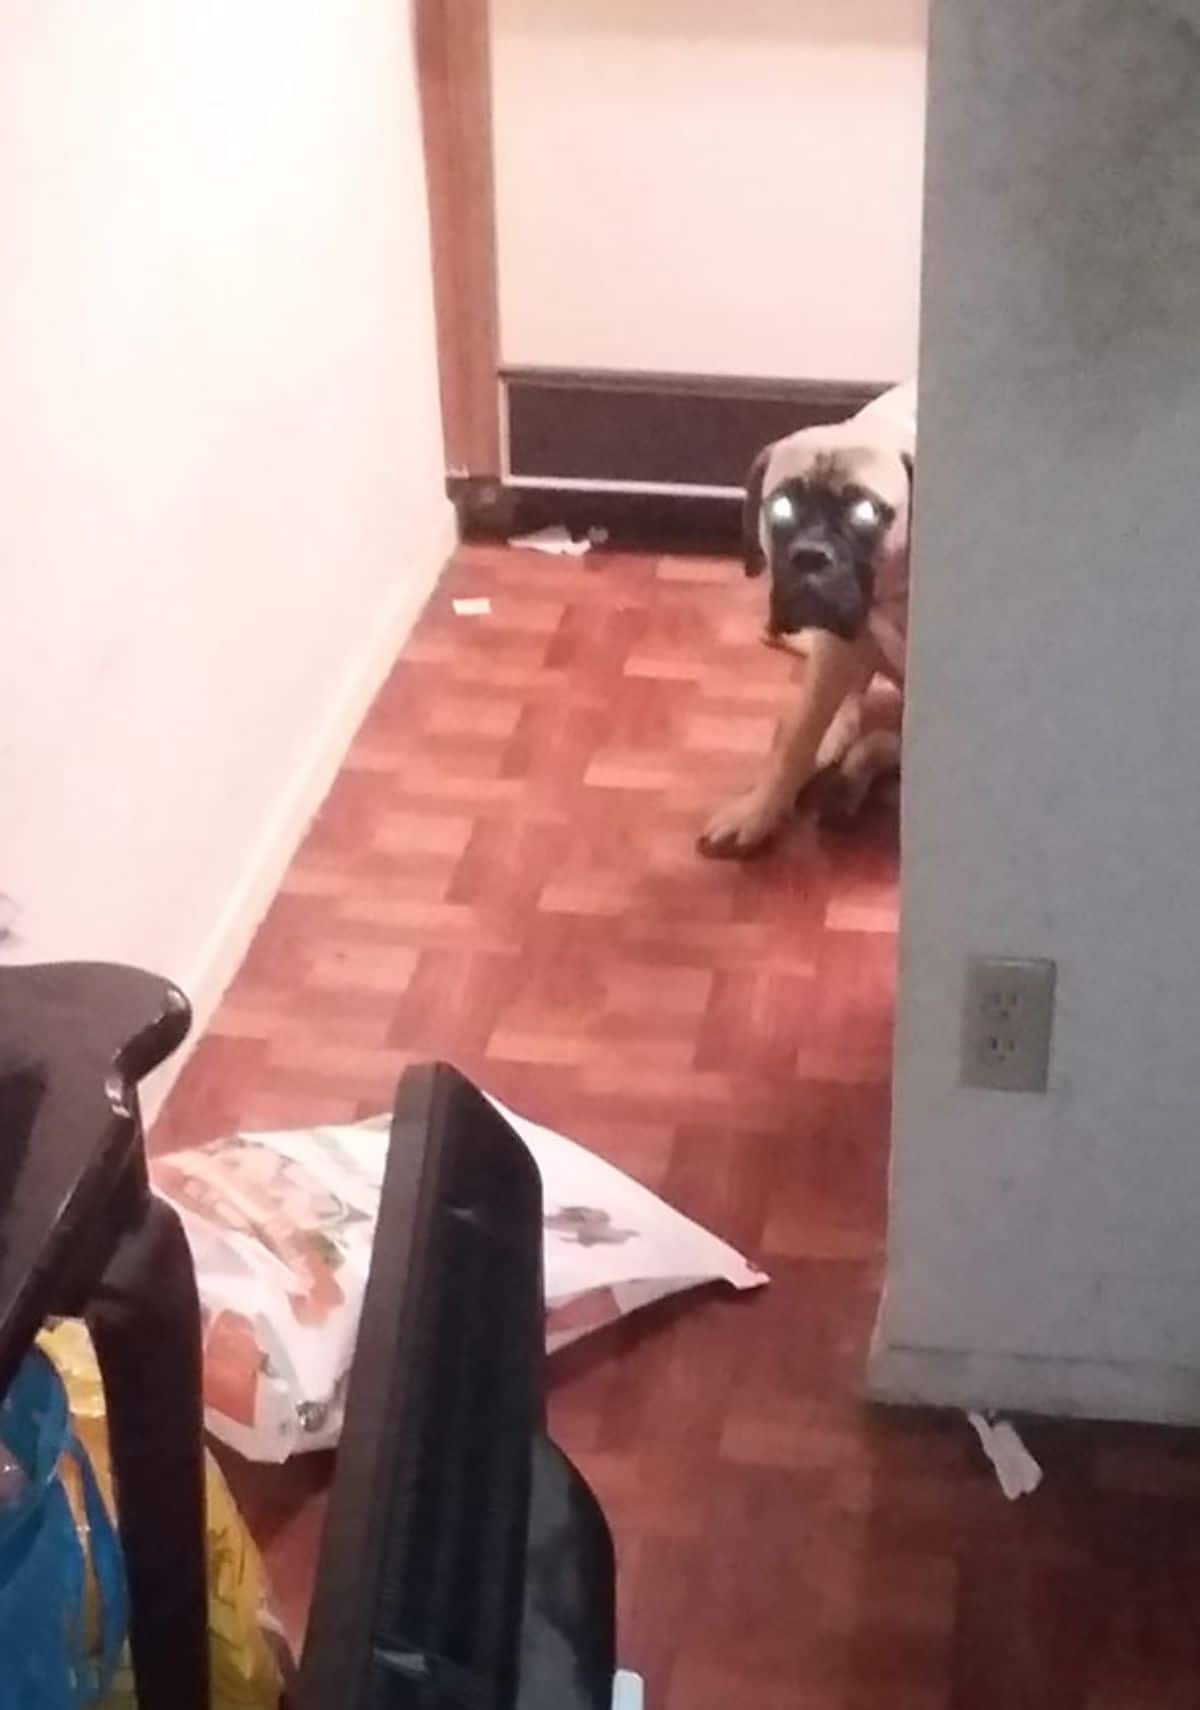 brown bullmastiff sitting on kitchen floor with a dog food packet fallen over